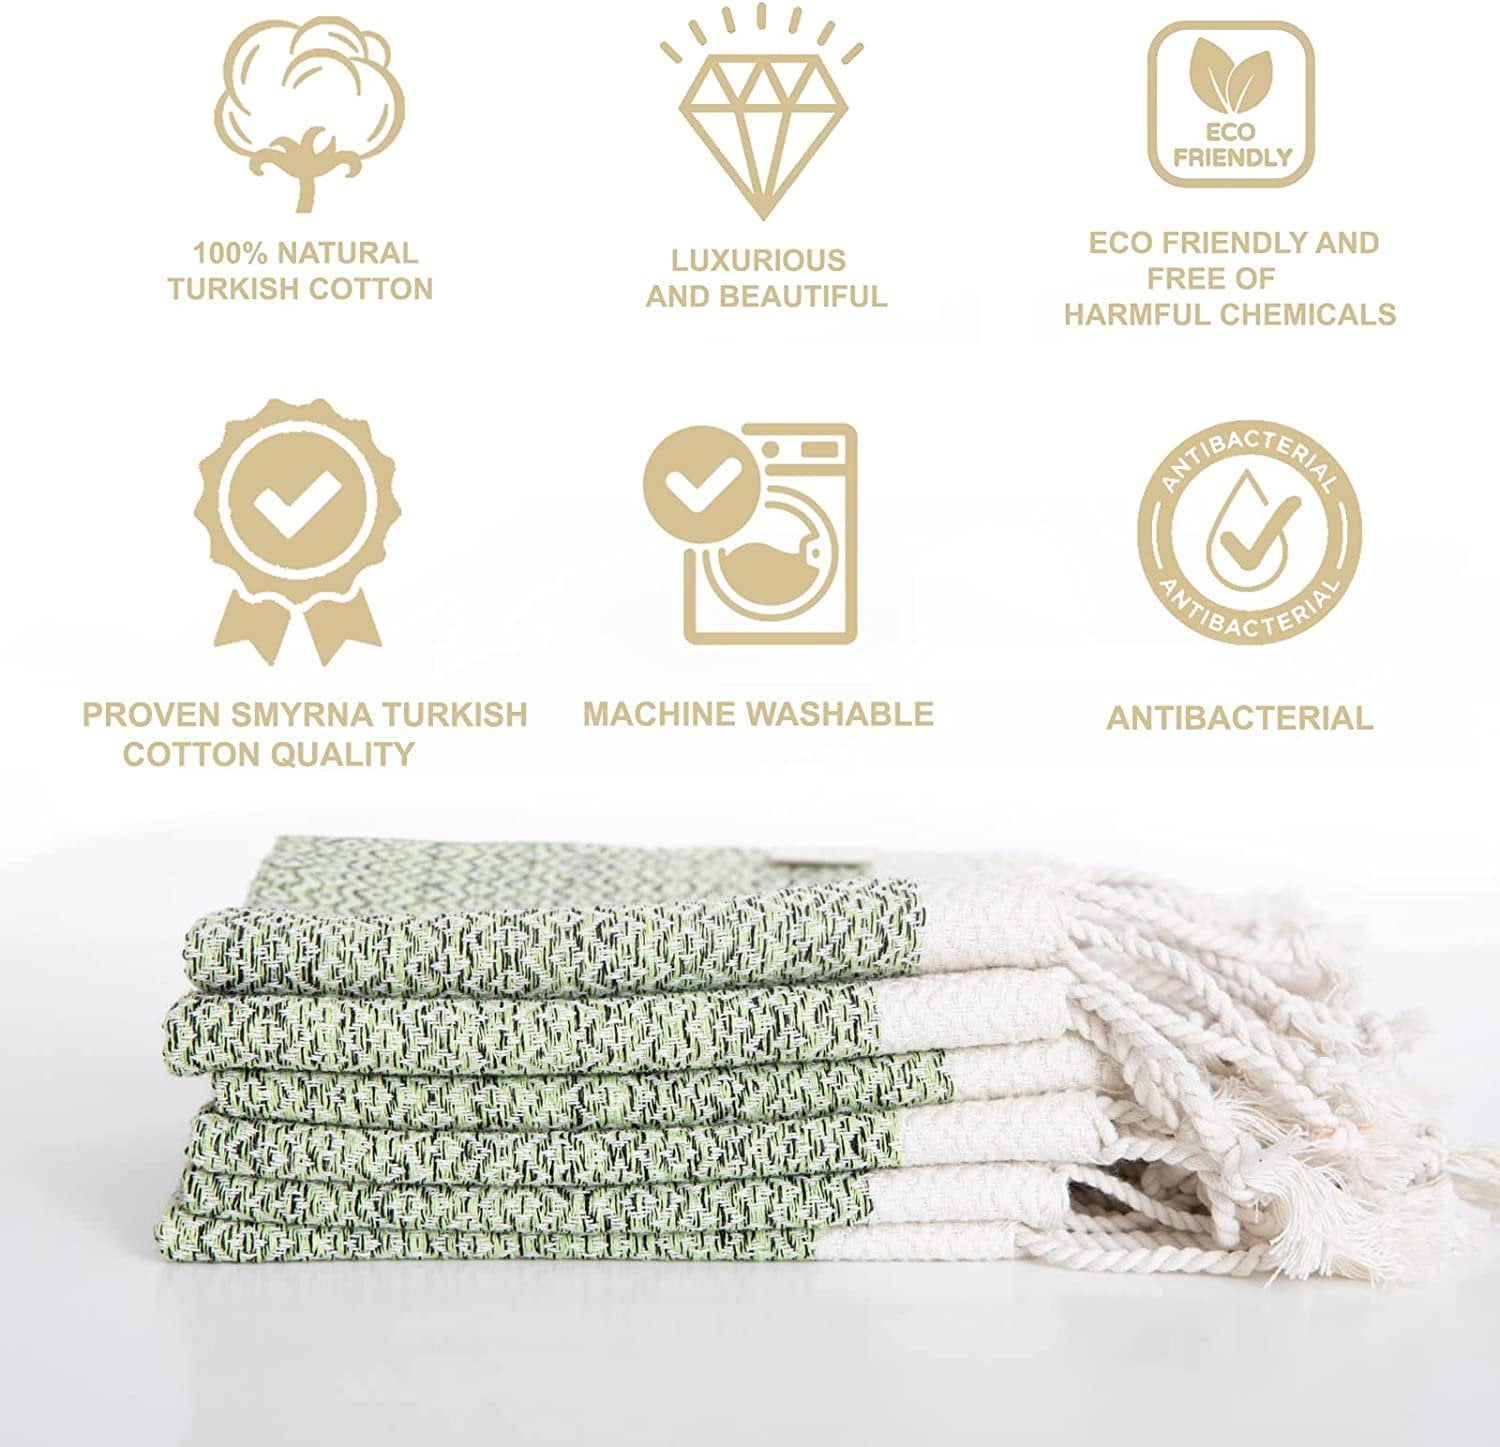 Cacala 100% Turkish Cotton Kitchen Tea Towels, Highly Absorbent Luxury Soft  Quick Drying Dish Towel with Hanging Loop for Gym, Yoga, Bath, Sports